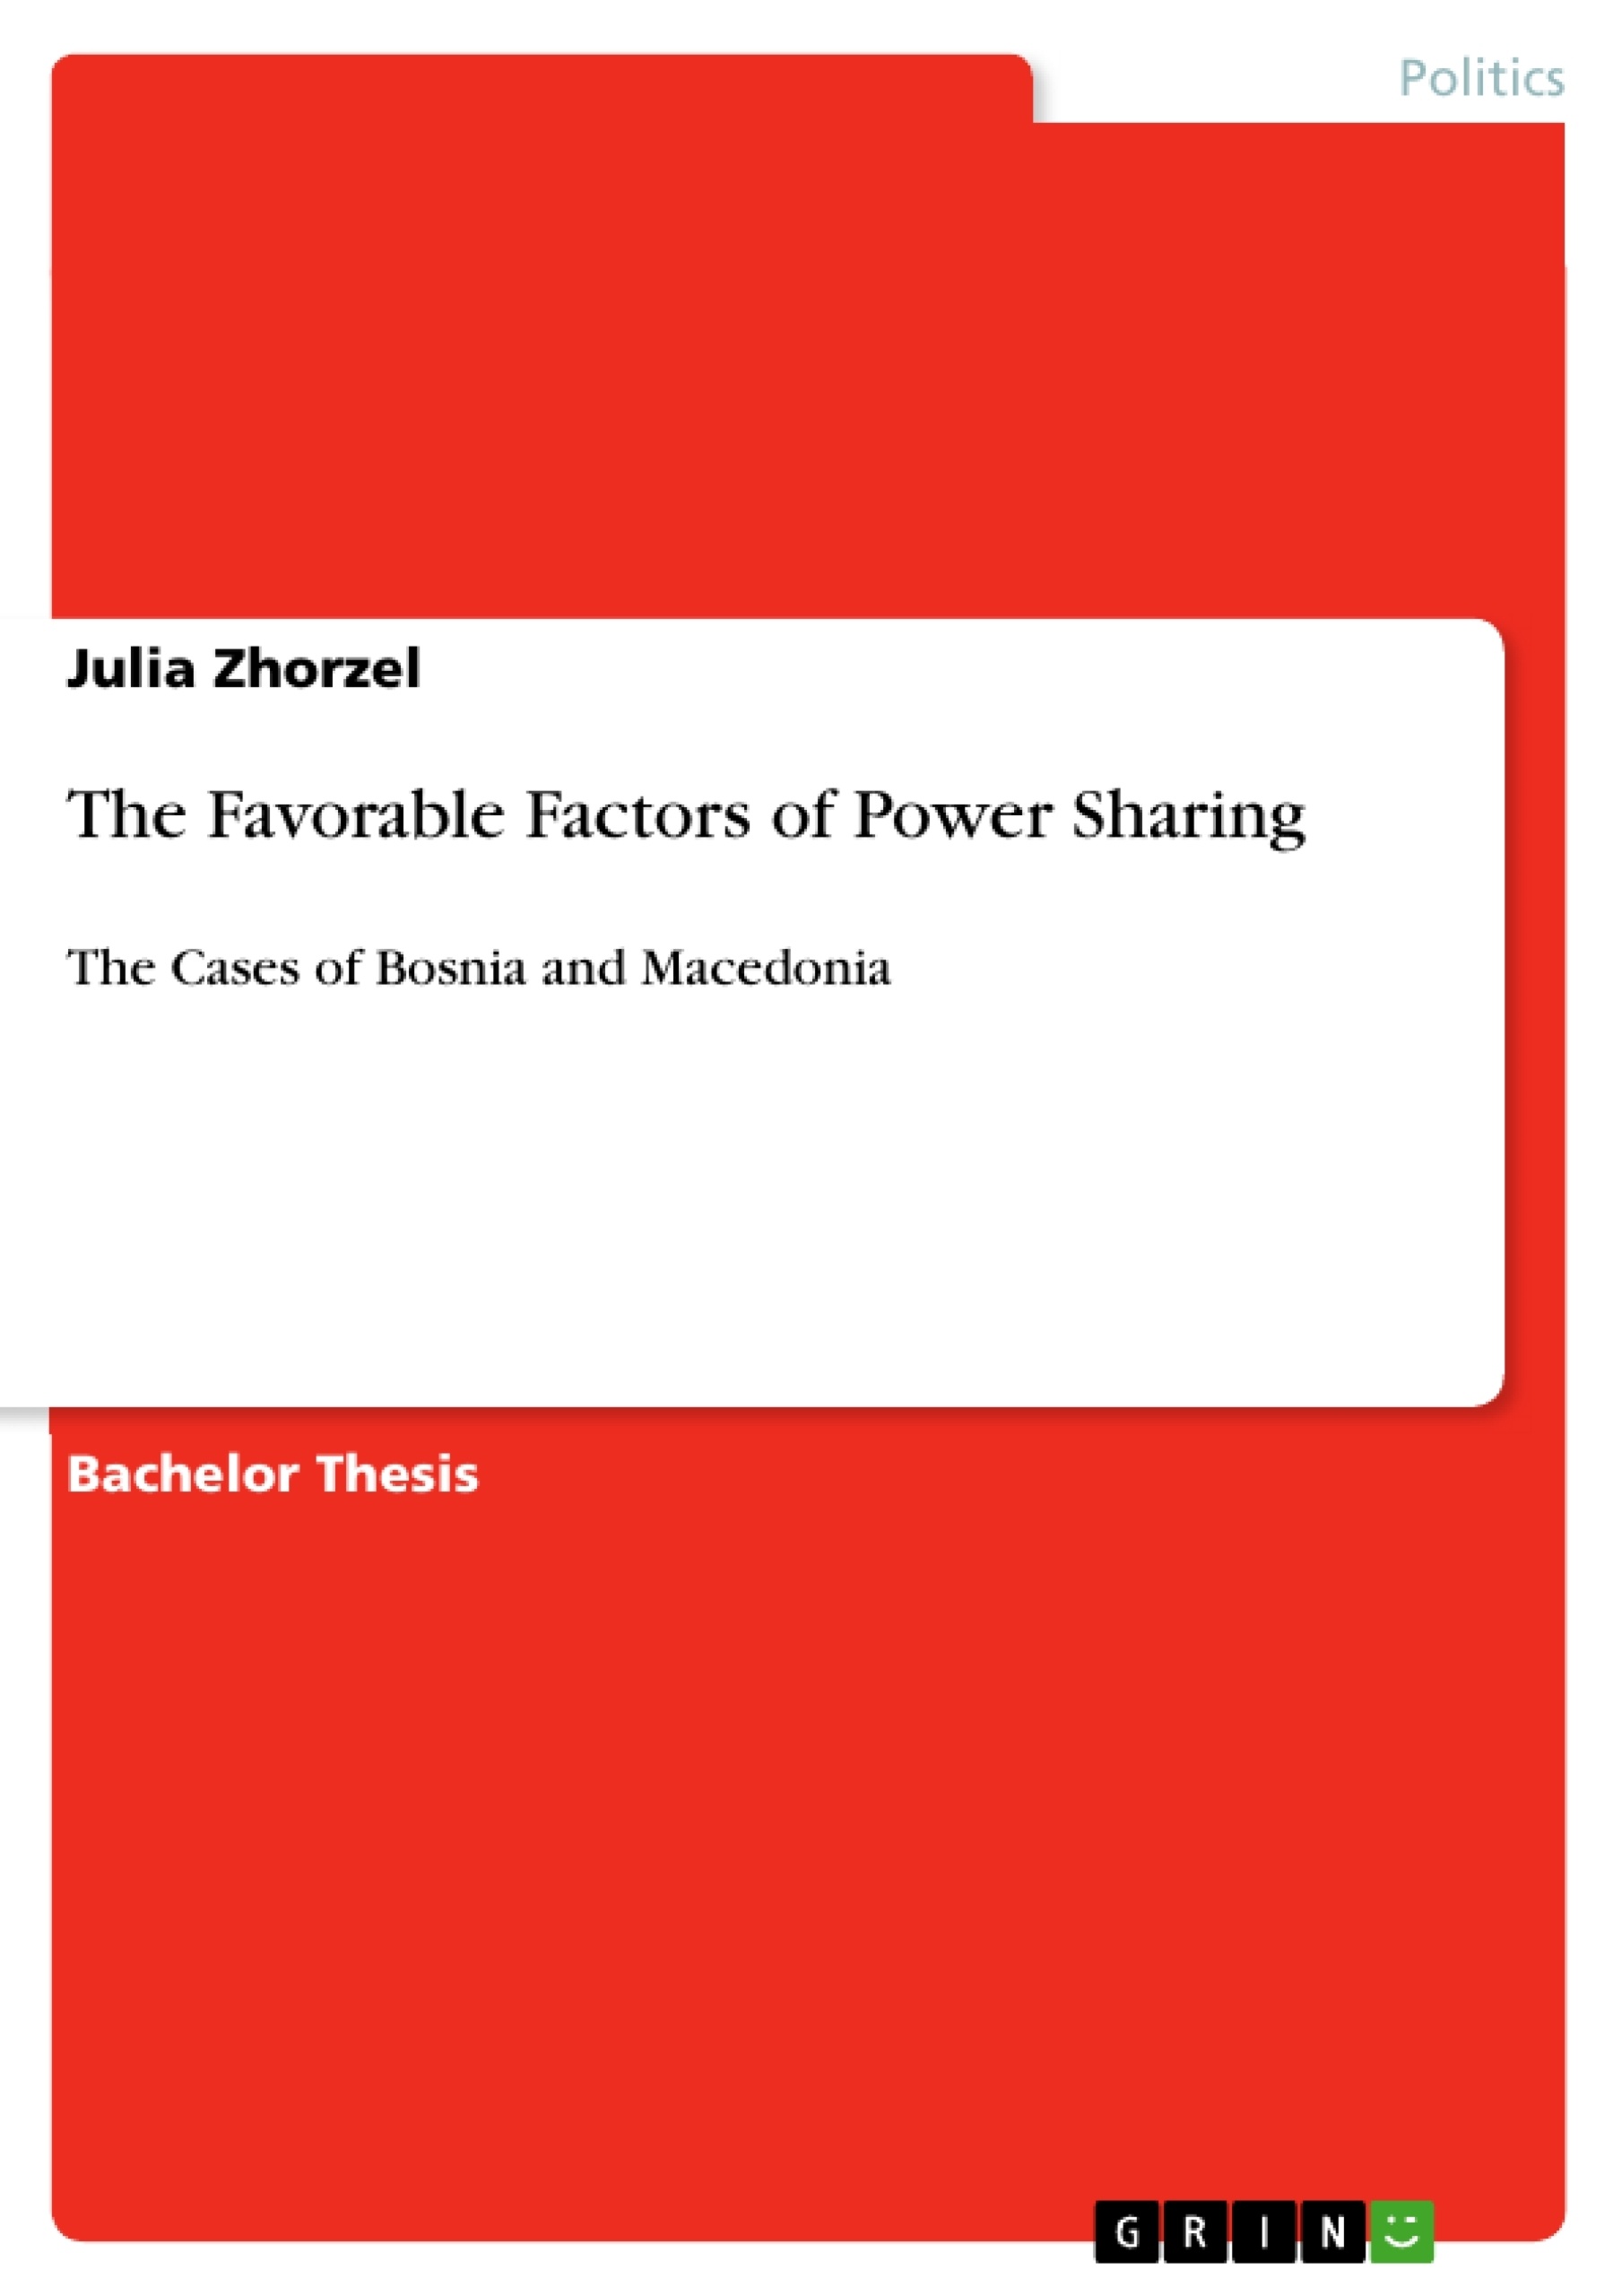 Título: The Favorable Factors of Power Sharing